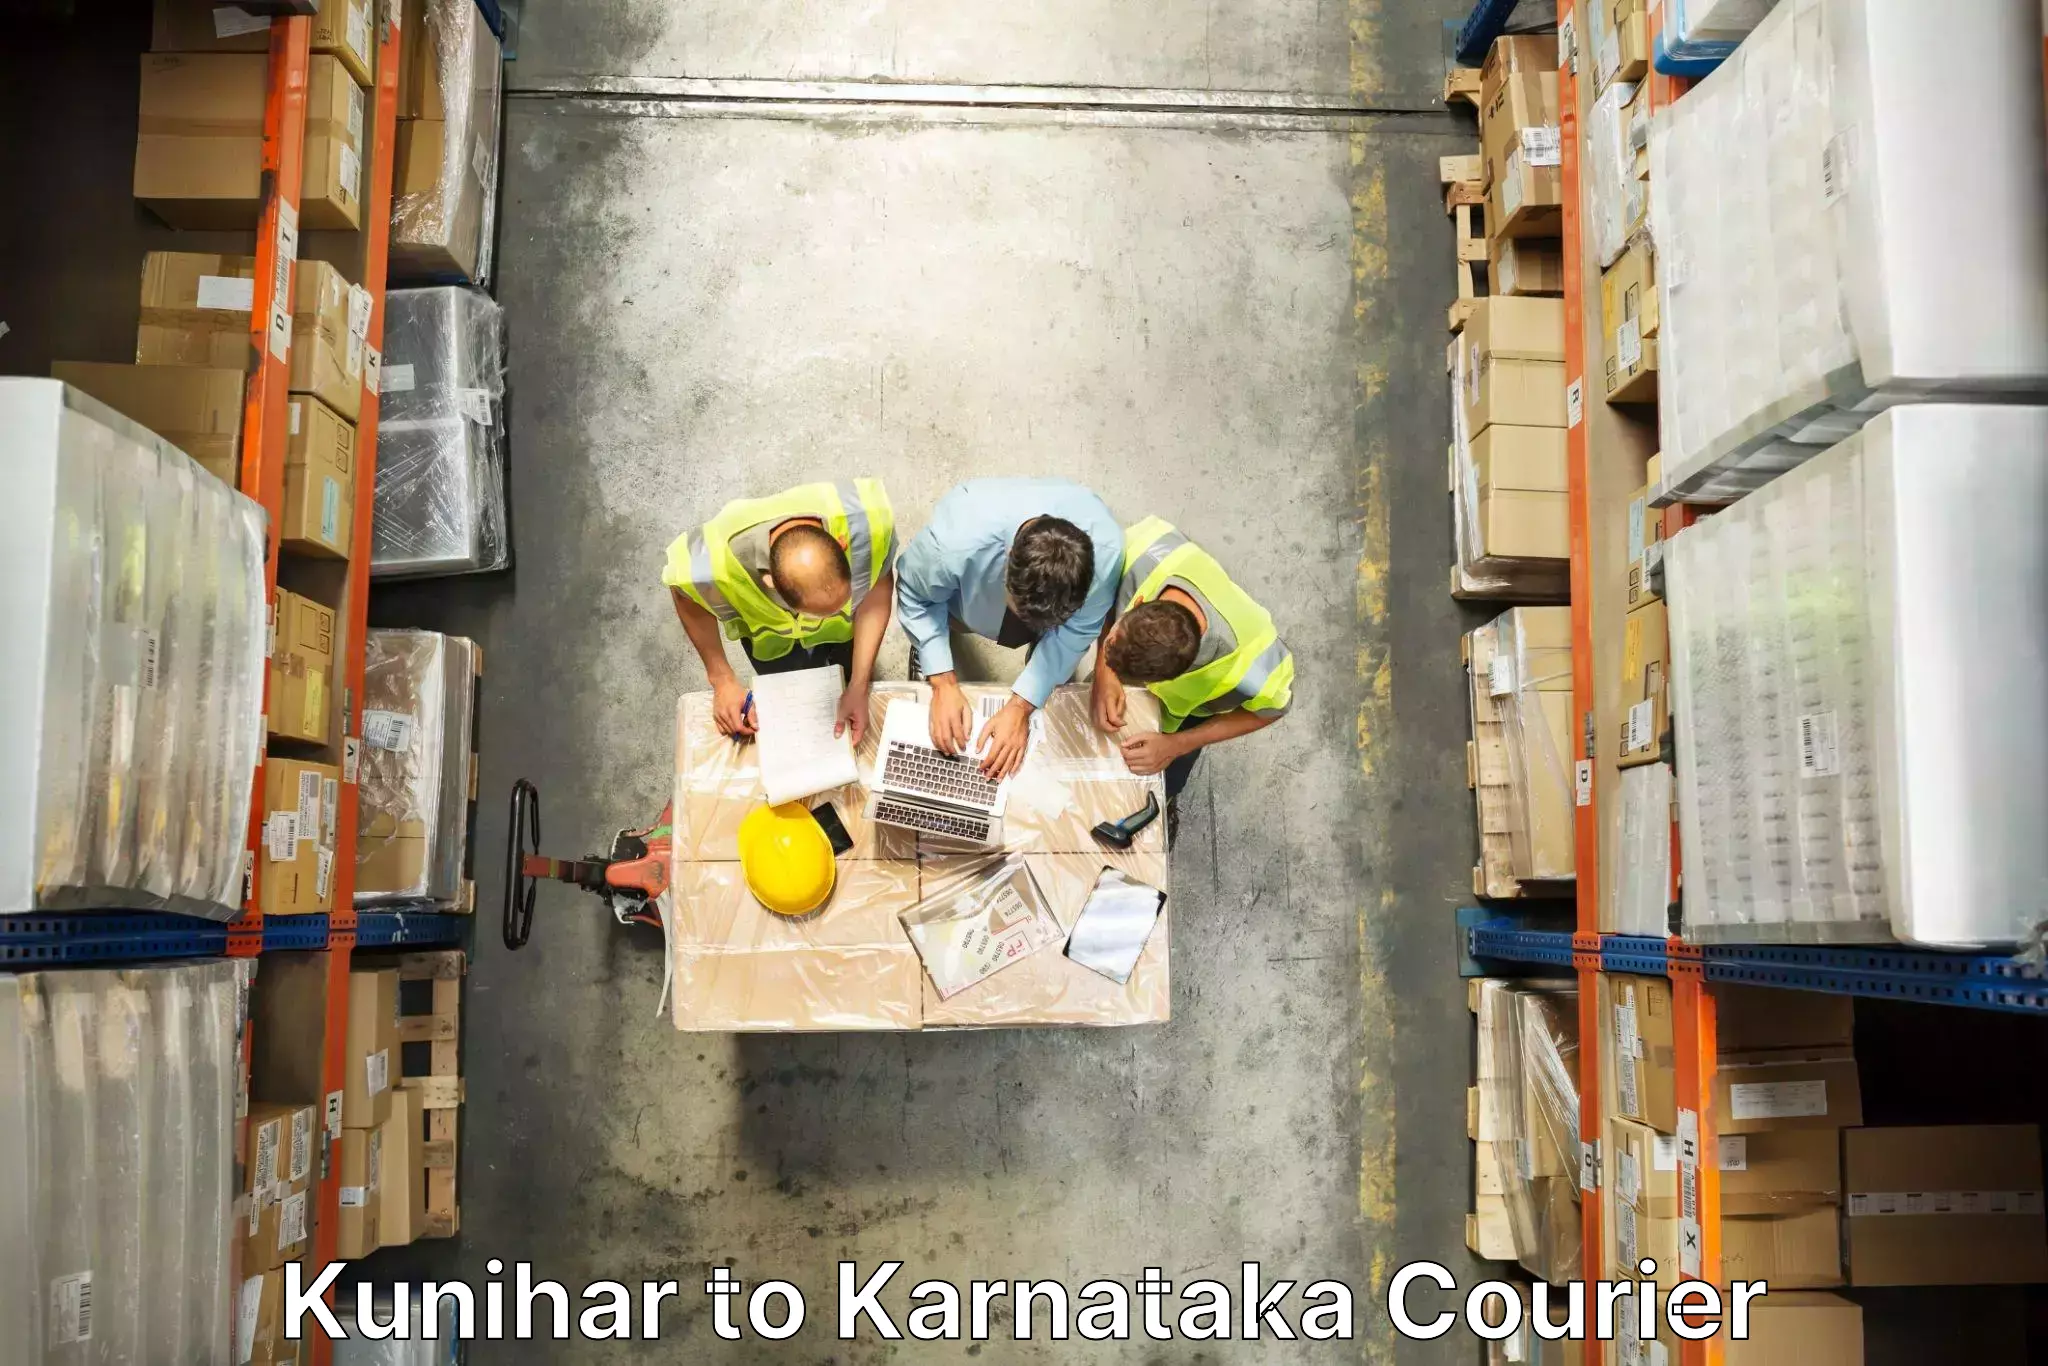 Furniture moving specialists Kunihar to yedrami